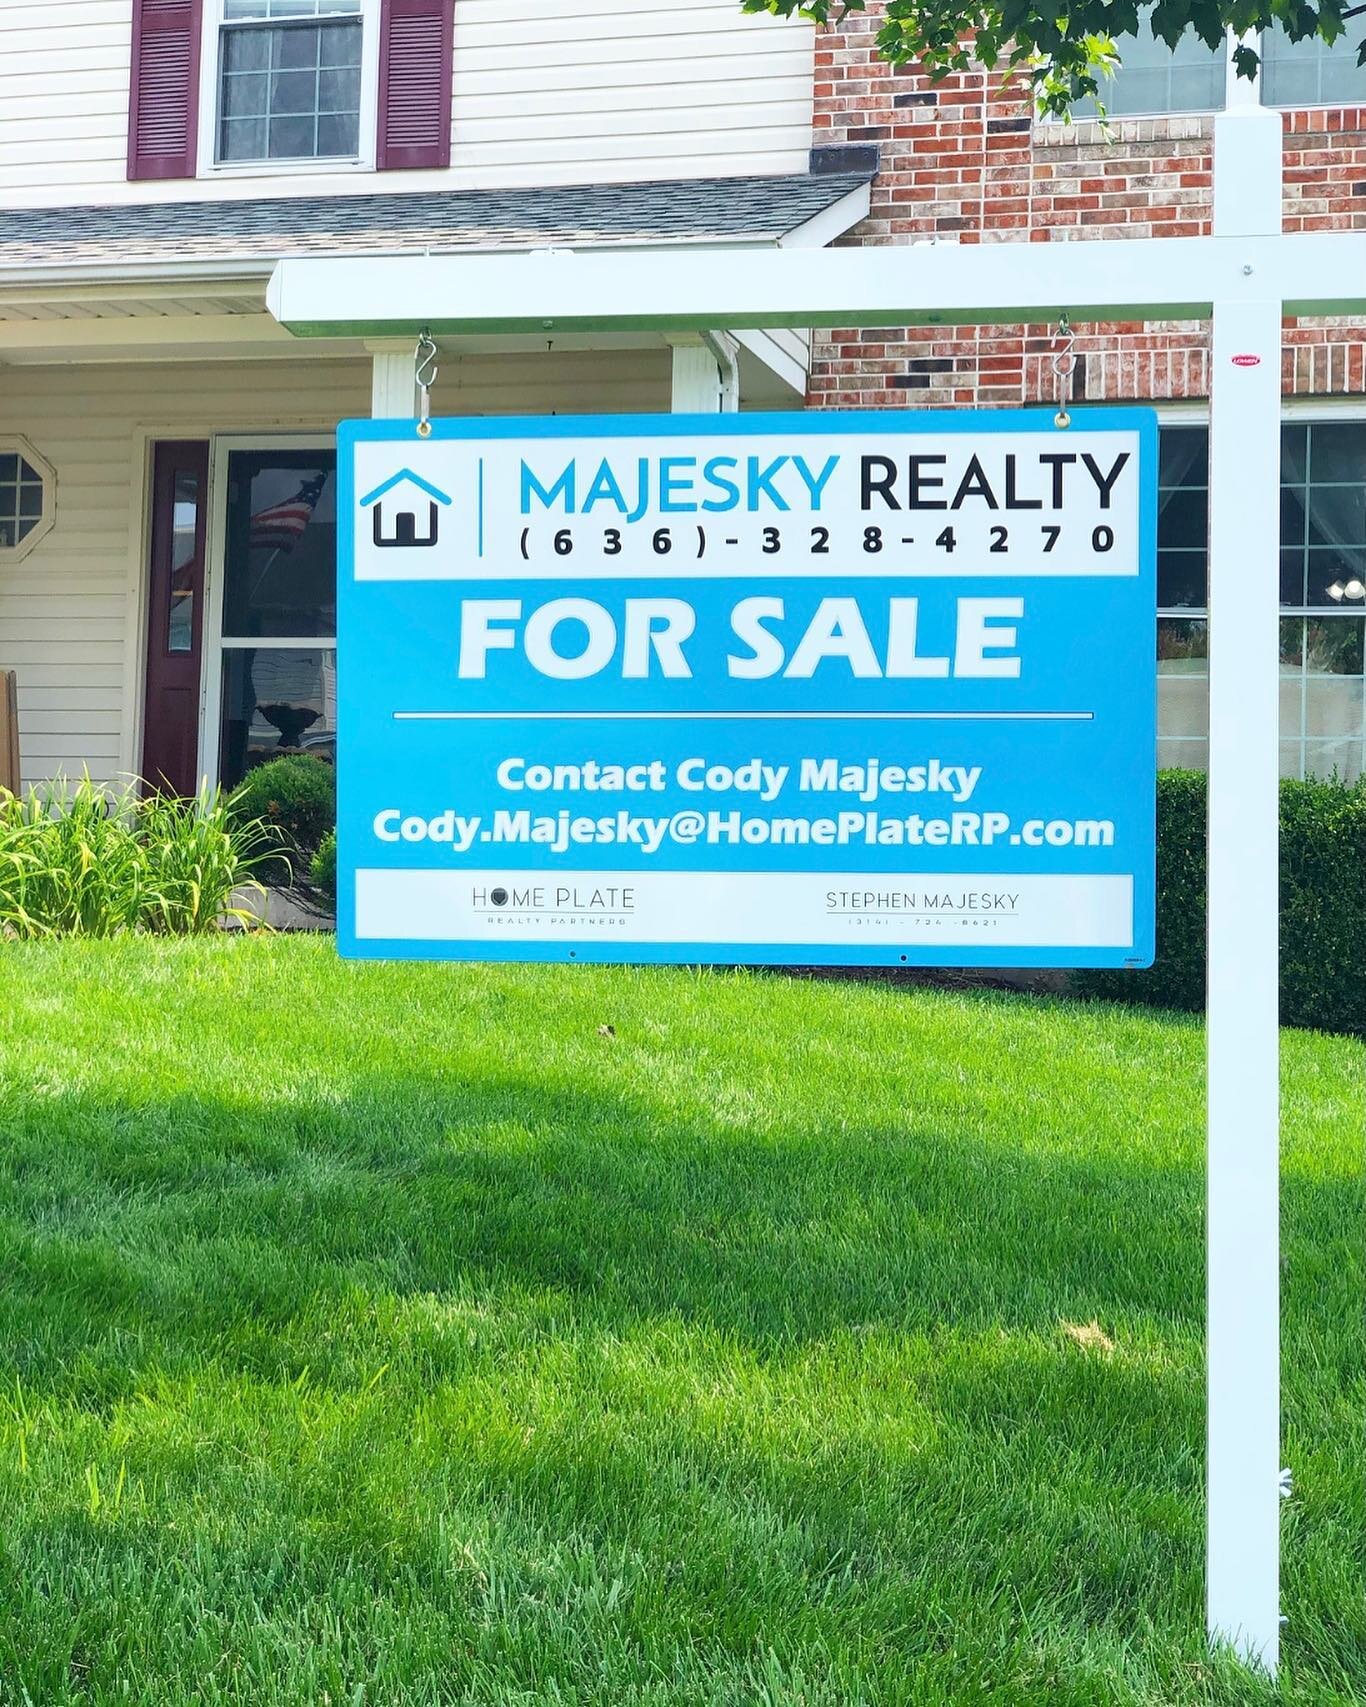 Now that is one good looking sign! Call me at 636-328-4270 if you are looking to sell and want one in your yard 🏠